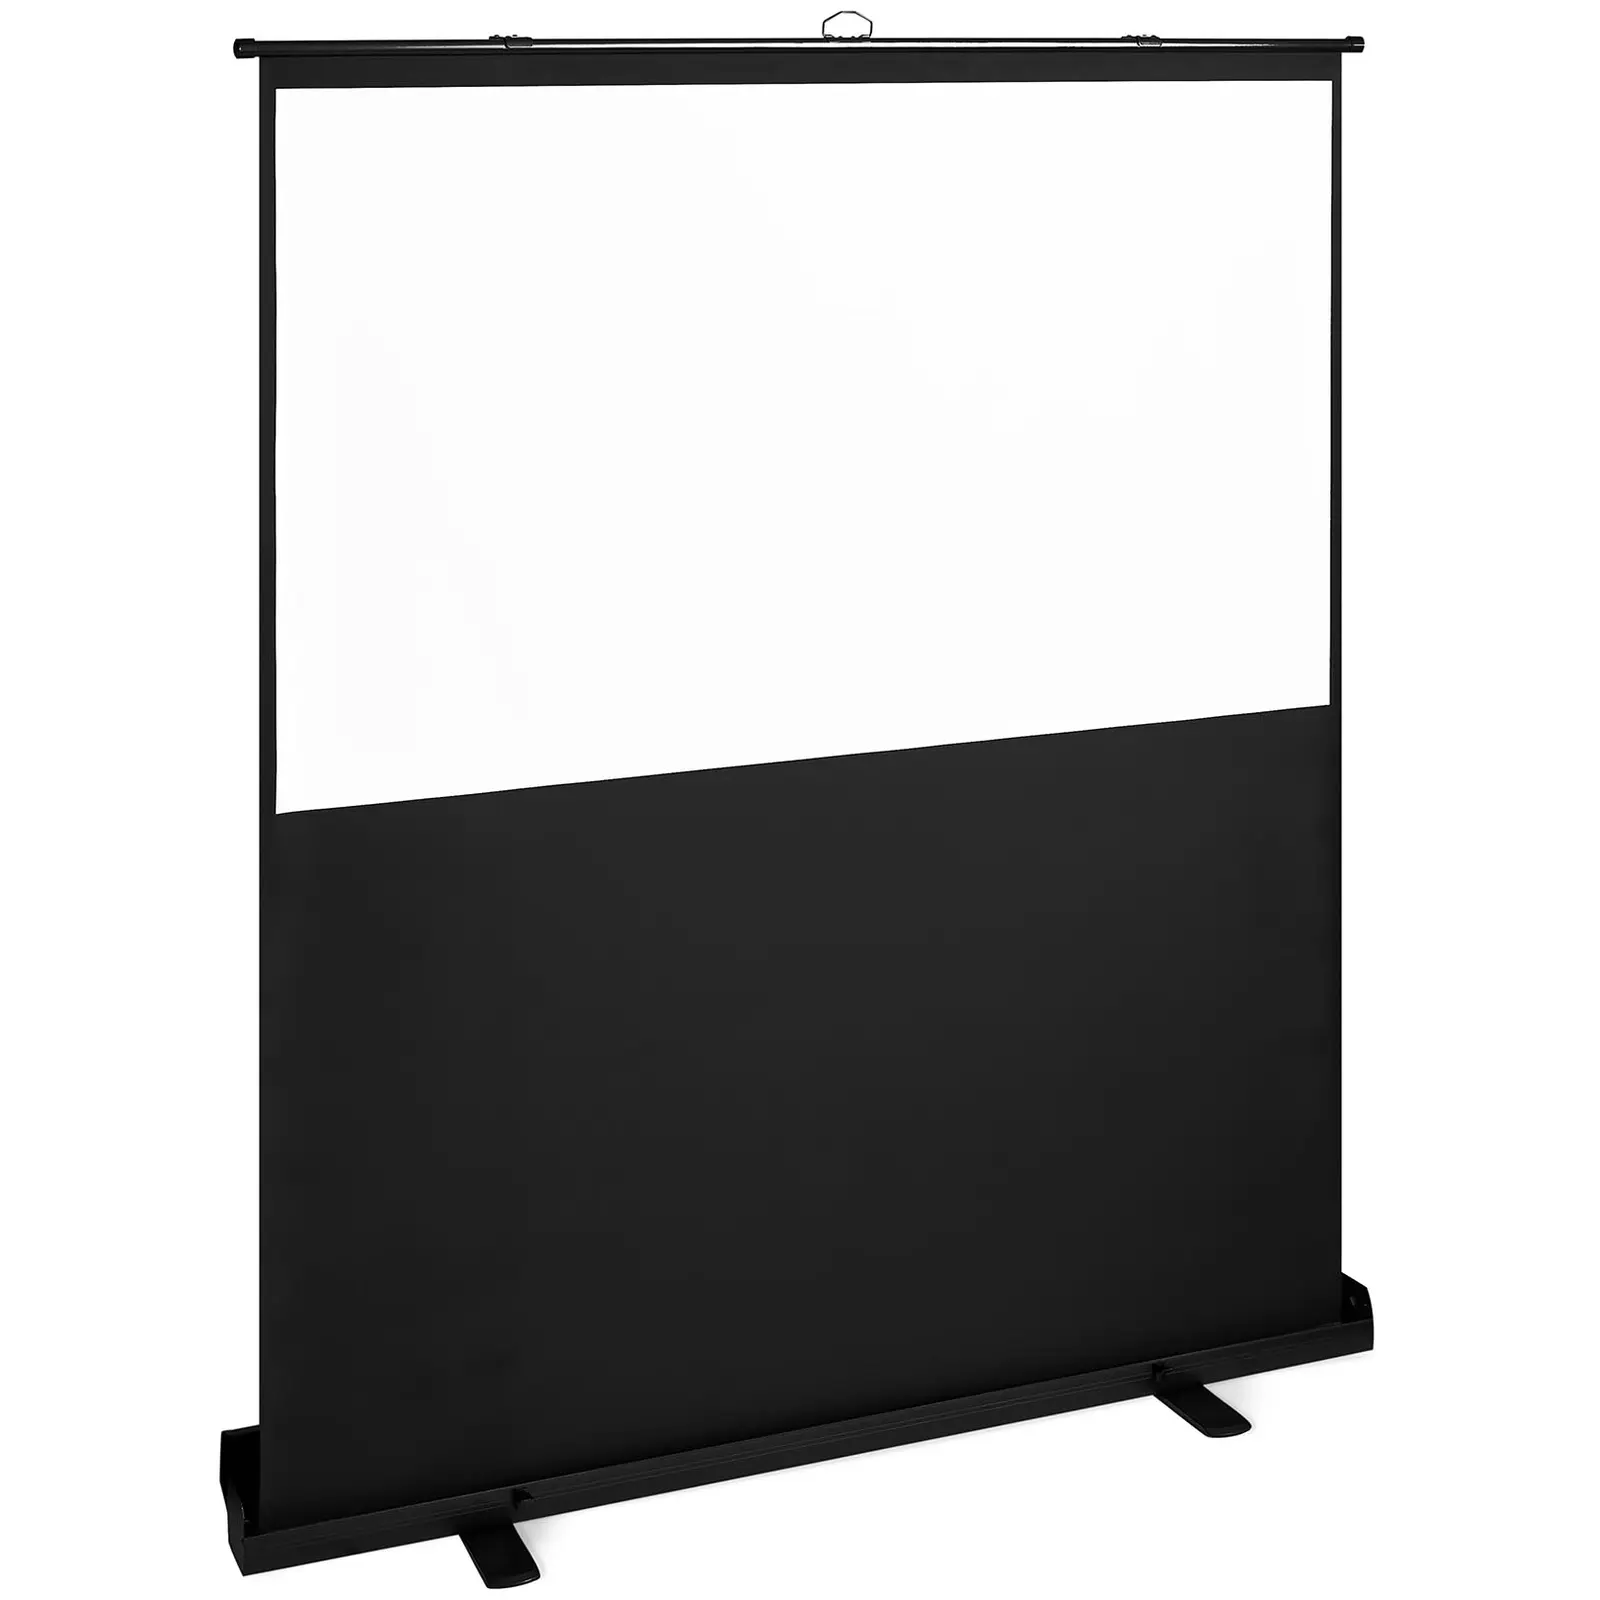 Roll-up Projector Screen - 188.5 x 203 cm - 16:9 - mobile